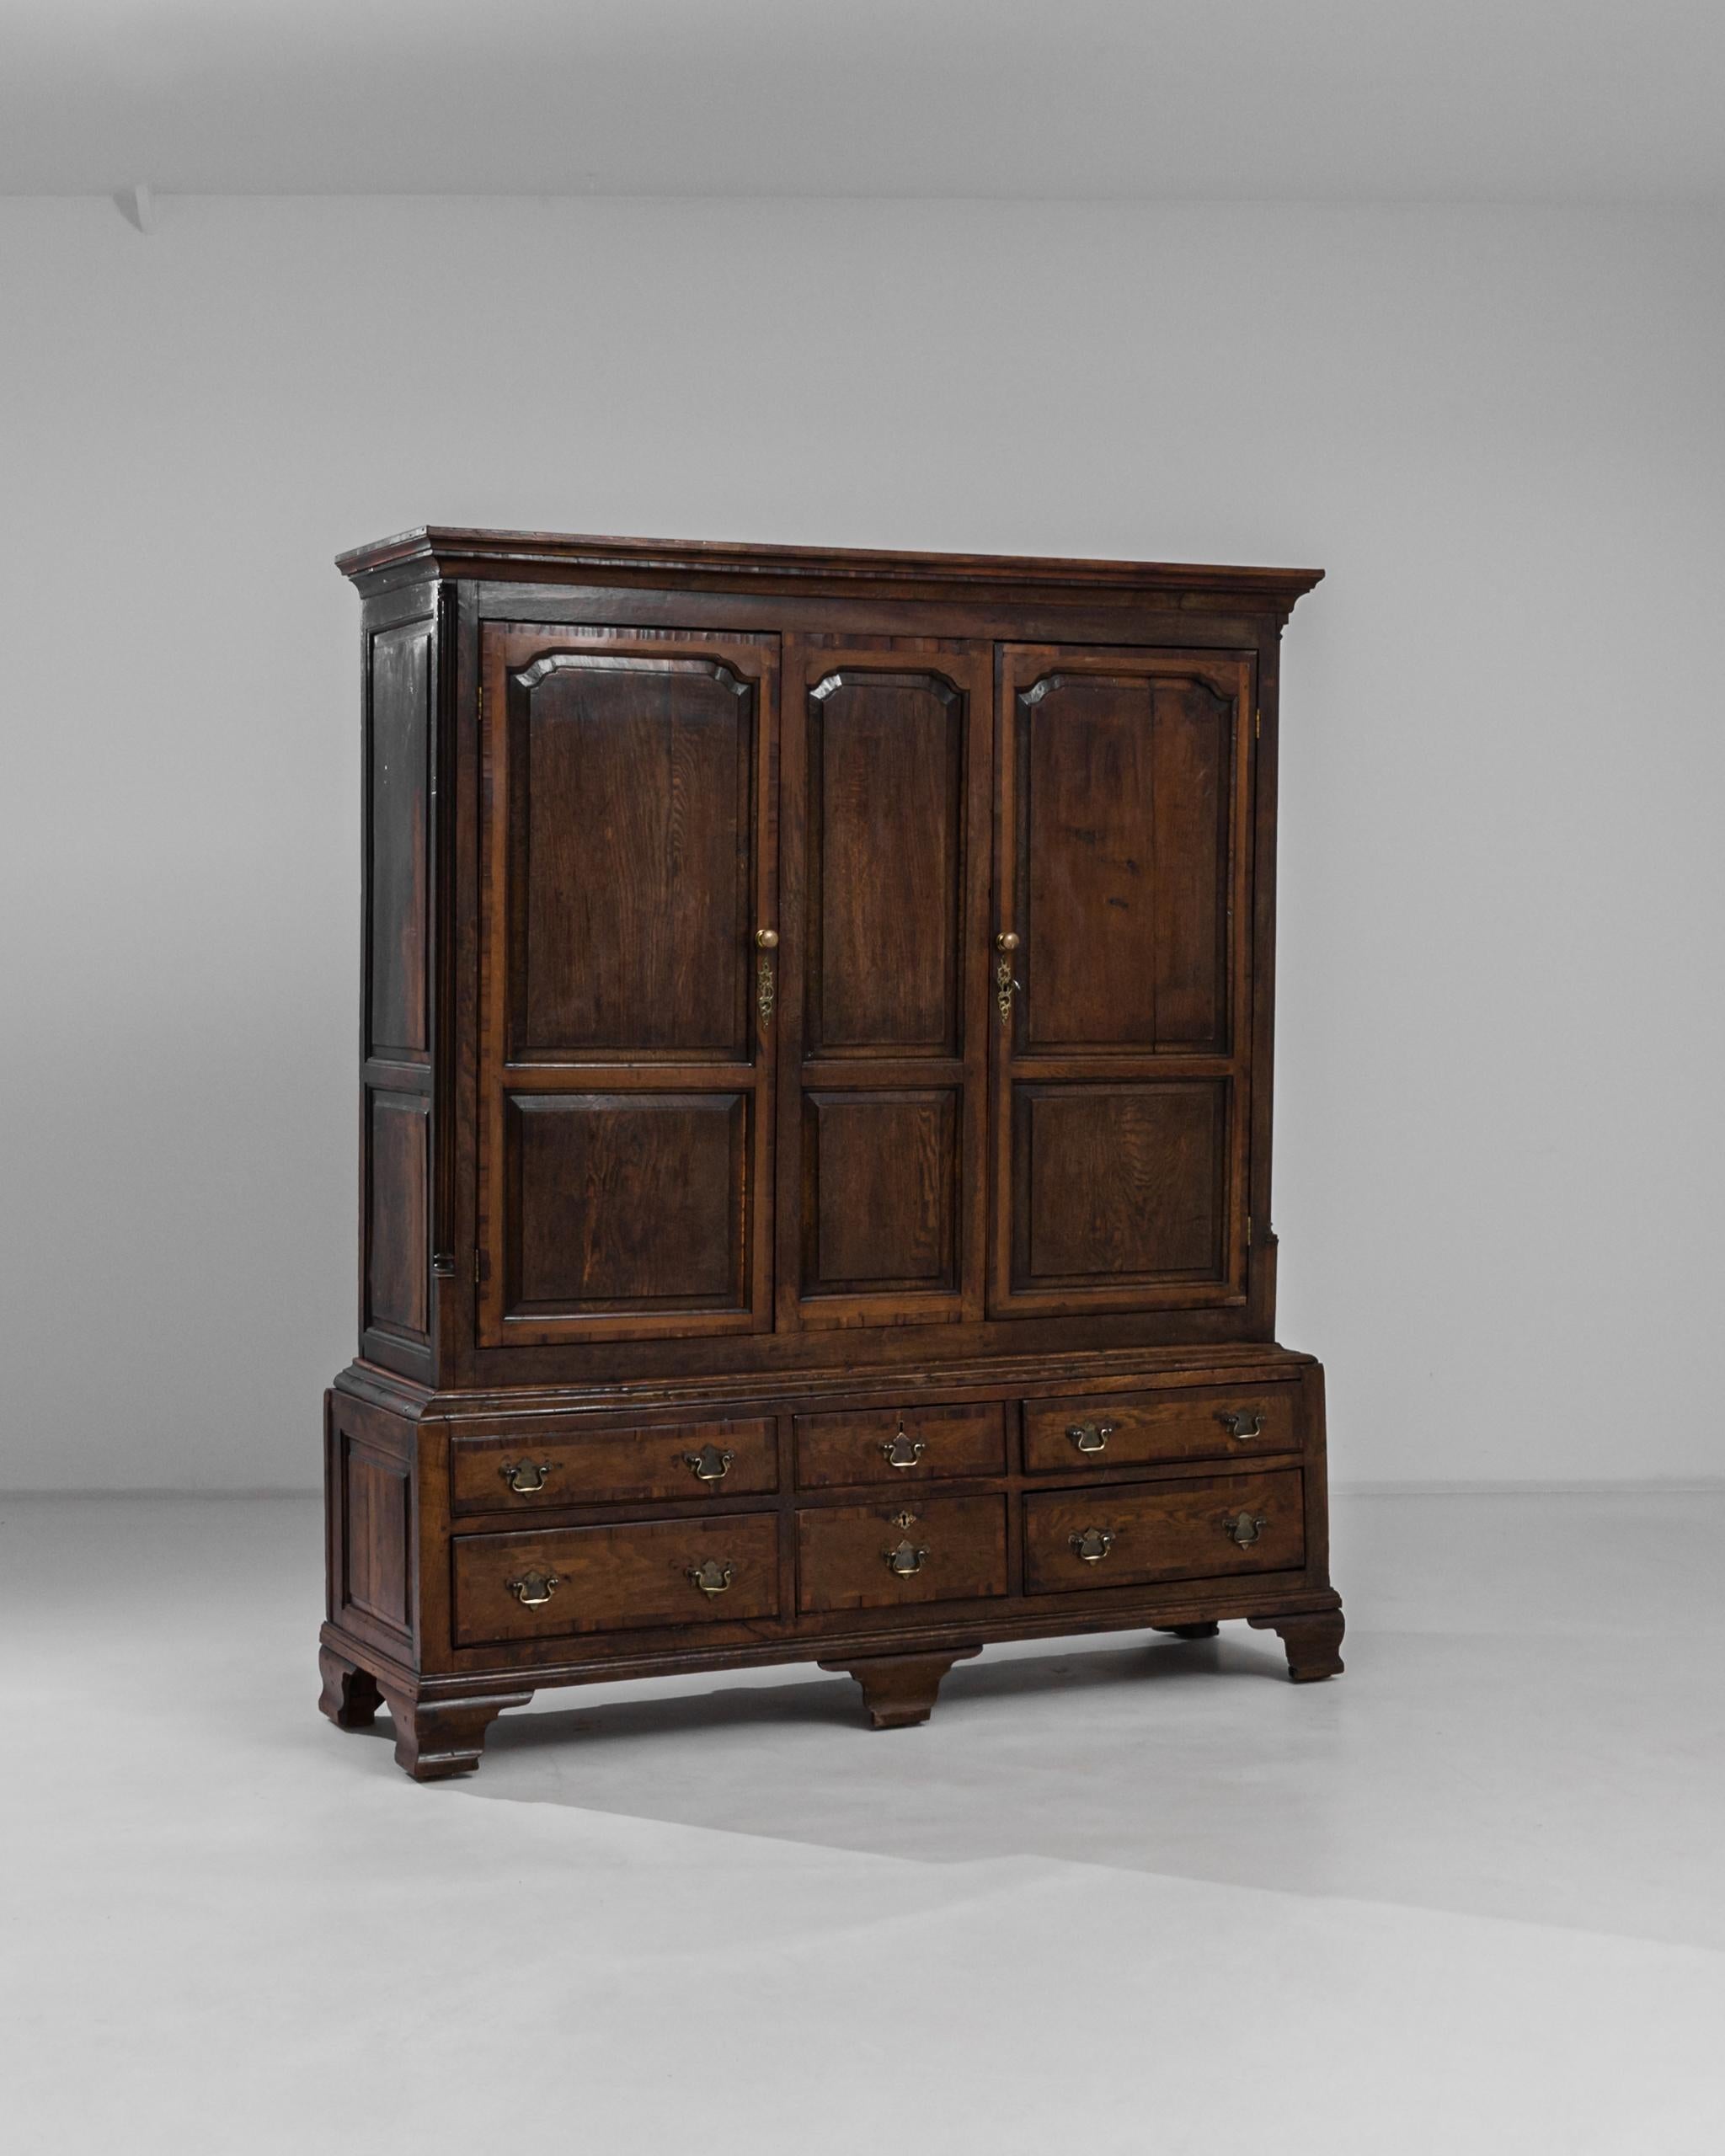 A dark wooden cabinet with brass hardware, circa 1870s England. Dark and warm oak panels comprise a large and elaborate structure. Lined with numerous drawers faced with an arch motif, this cabinet offers a sumptuous storage piece that will elevate